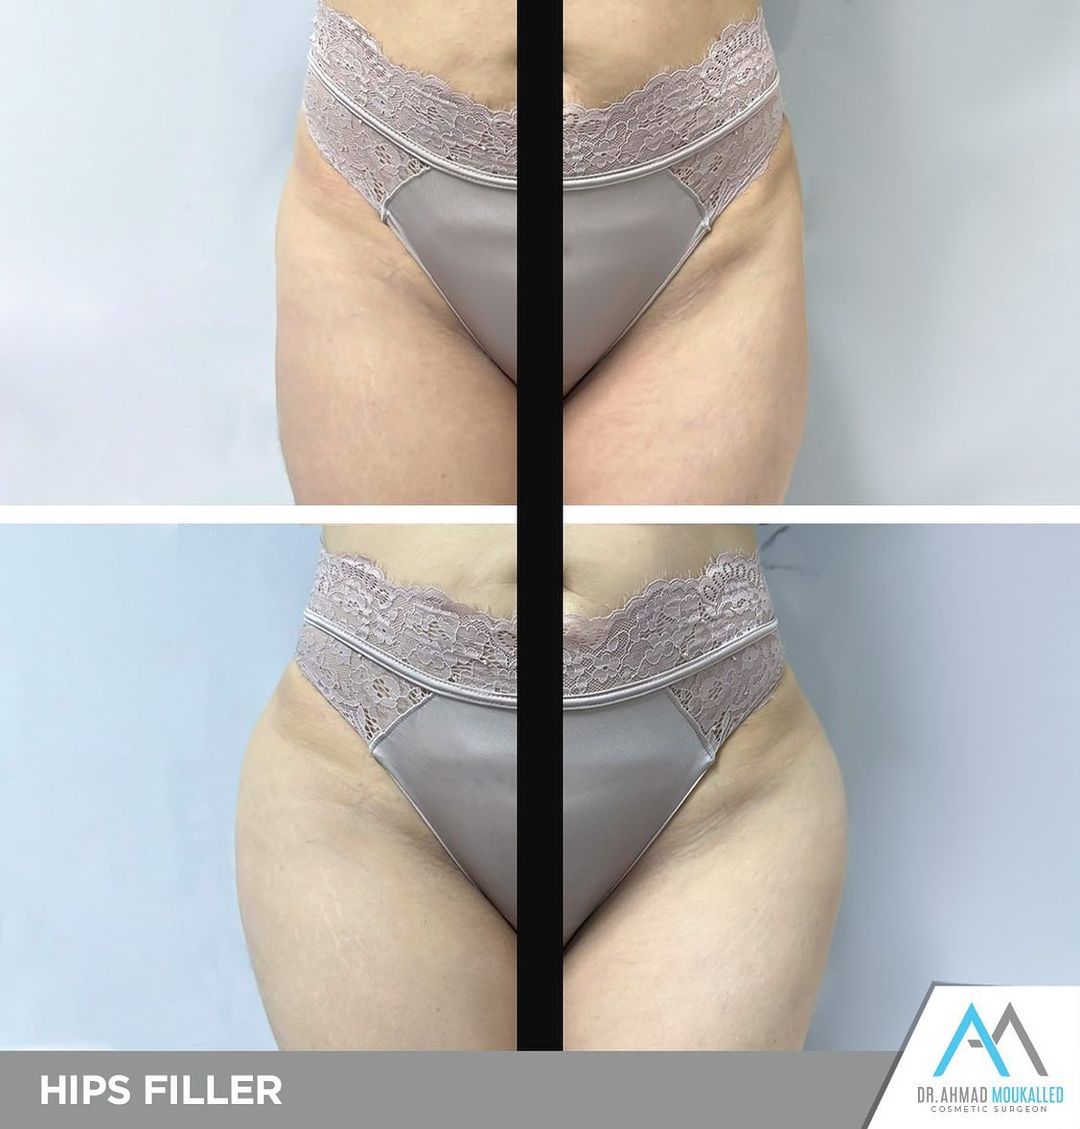 Hip Dips – Dr. Ahmad Moukalled